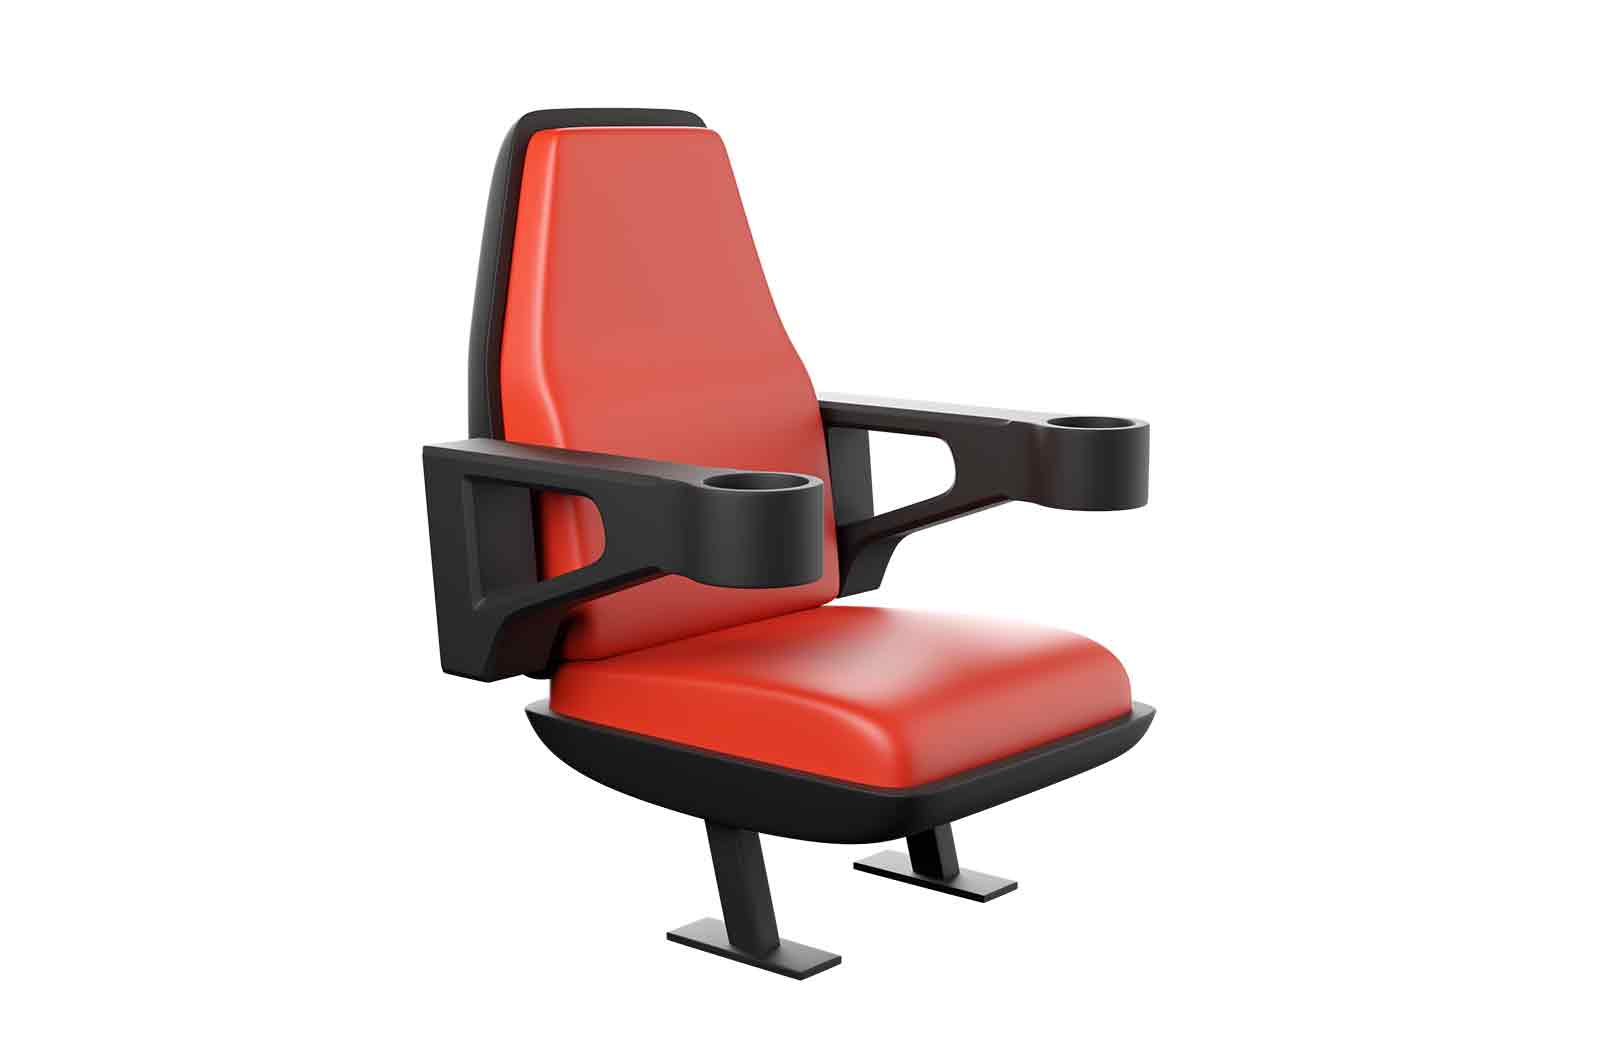 Cinema seat with glass-holder 3d rendered illustration. Movie industry element concept